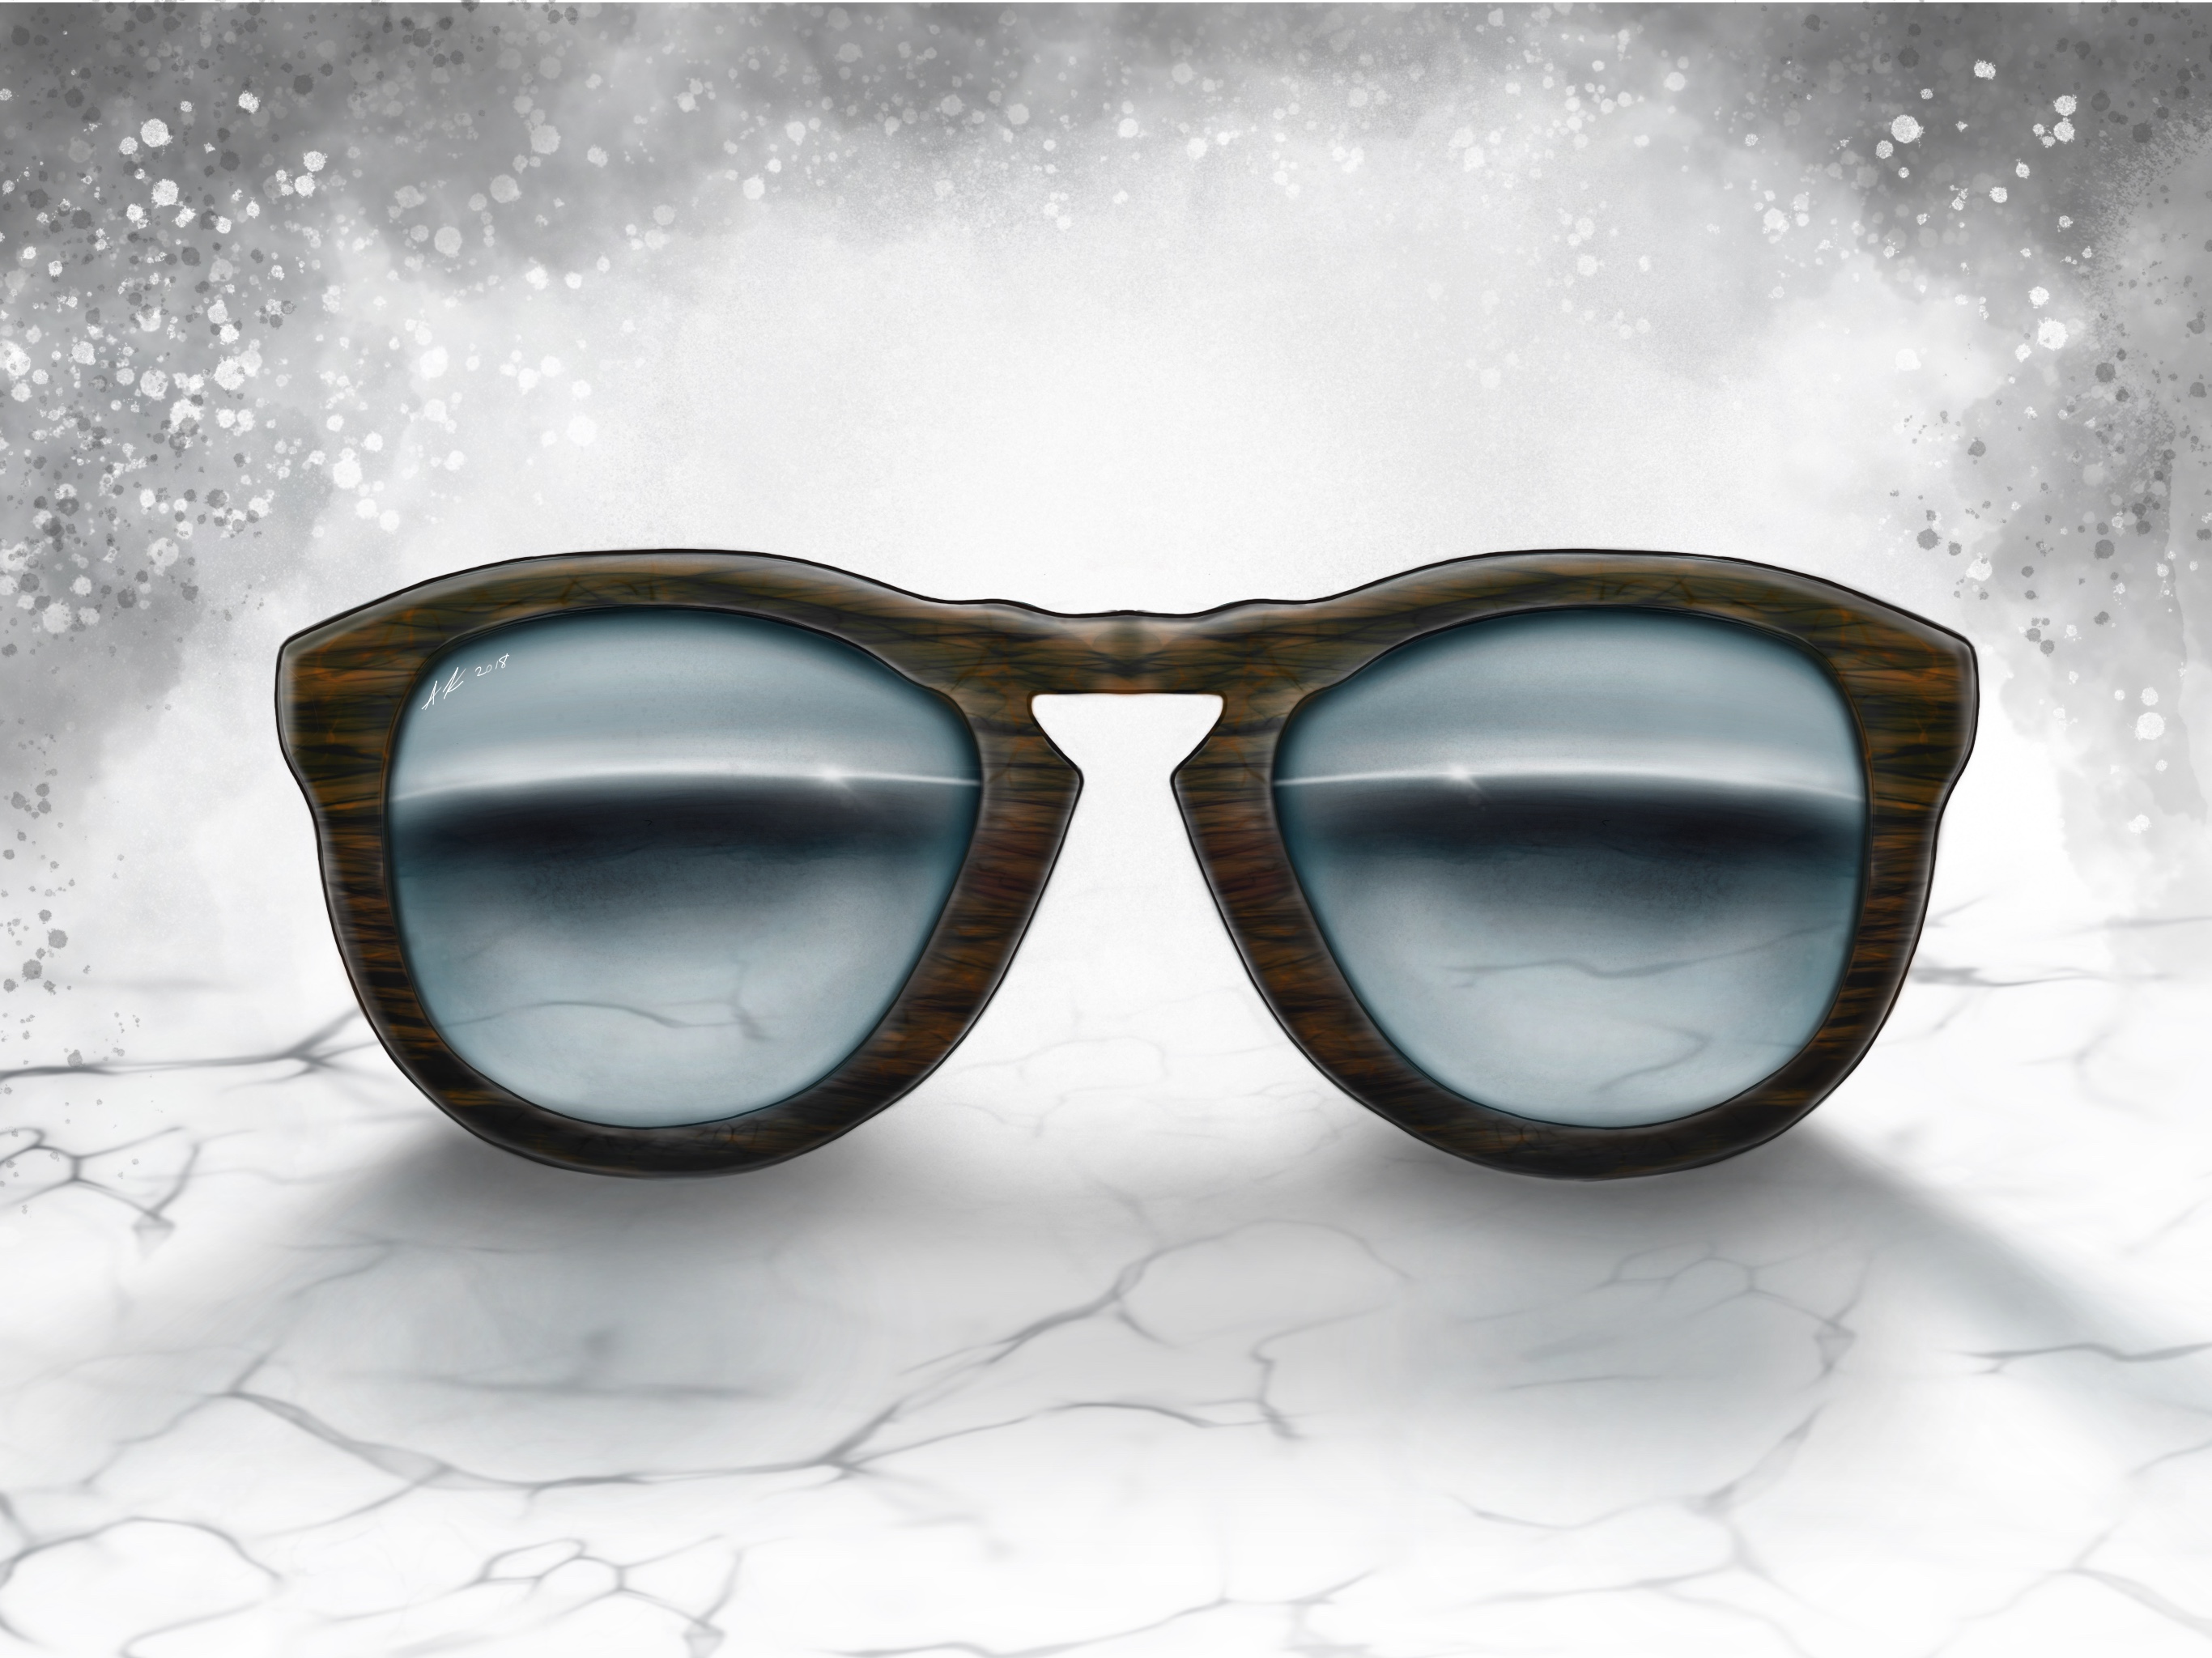 3d rendering of sunglasses with wooden frame.